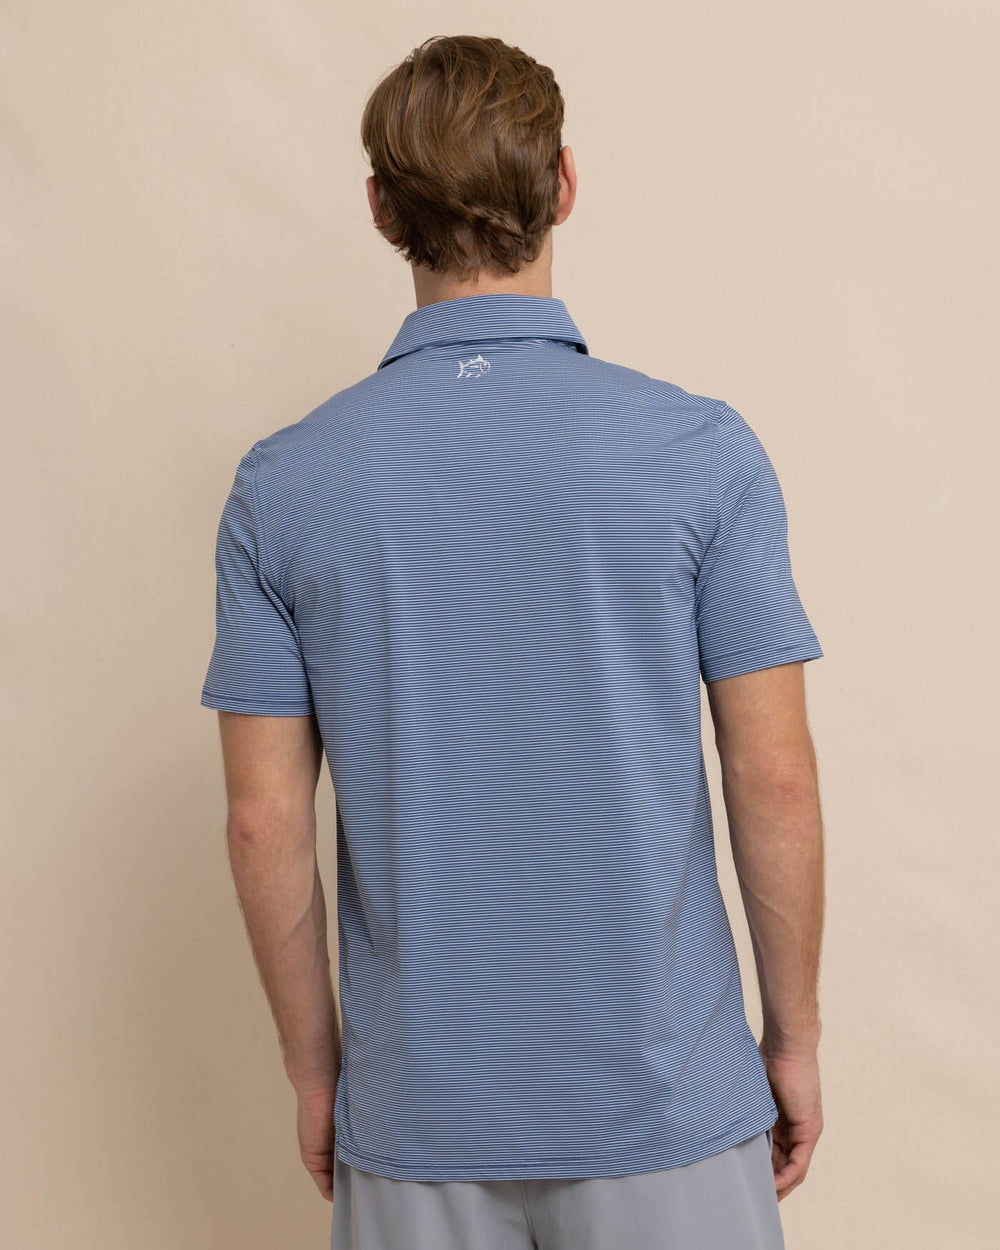 The back view of the Southern Tide brrr-eeze Baytop Stripe Performance Polo by Southern Tide - Aged Denim